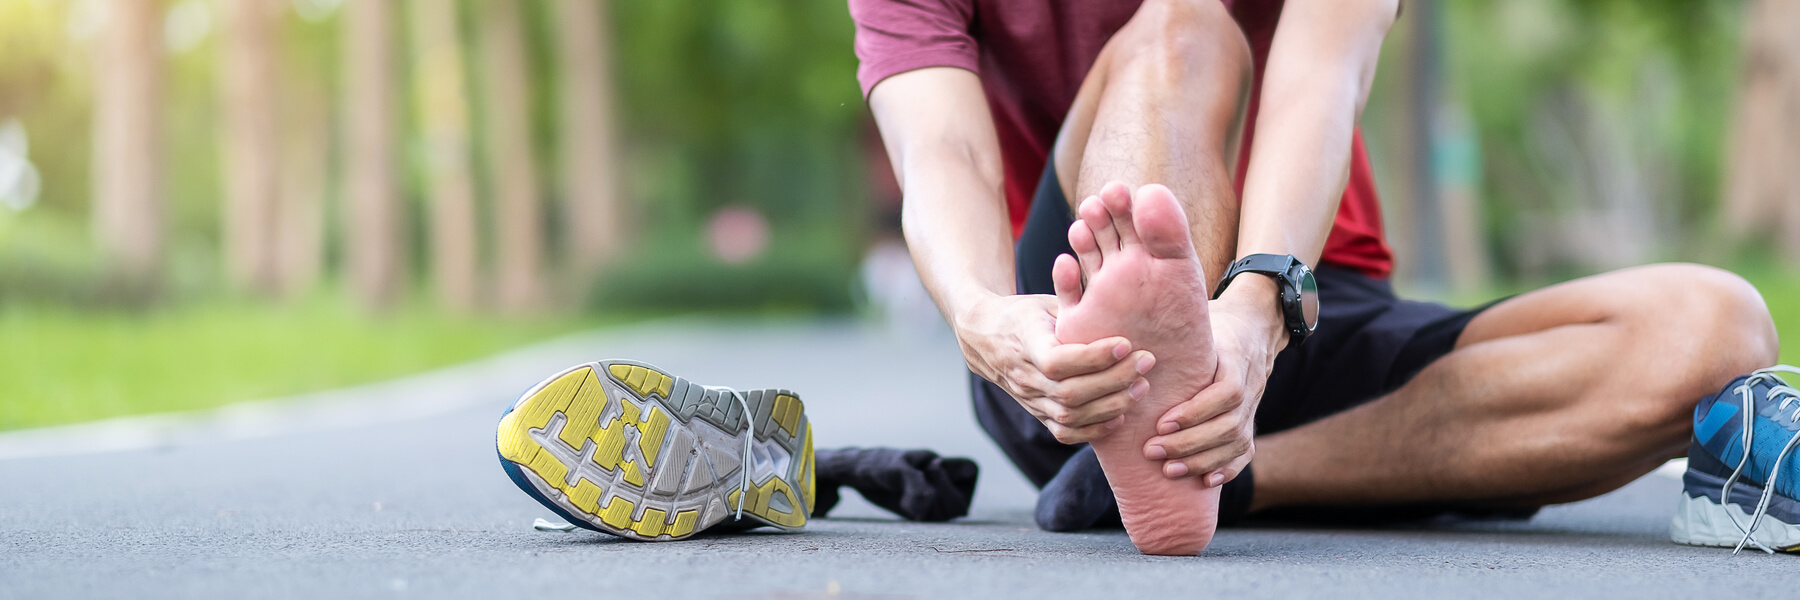 Young adult male sitting on ground with his running shoe off, holding foot or heel muscle pain, runner having heel or foot ache or pain due to Plantar fasciitis